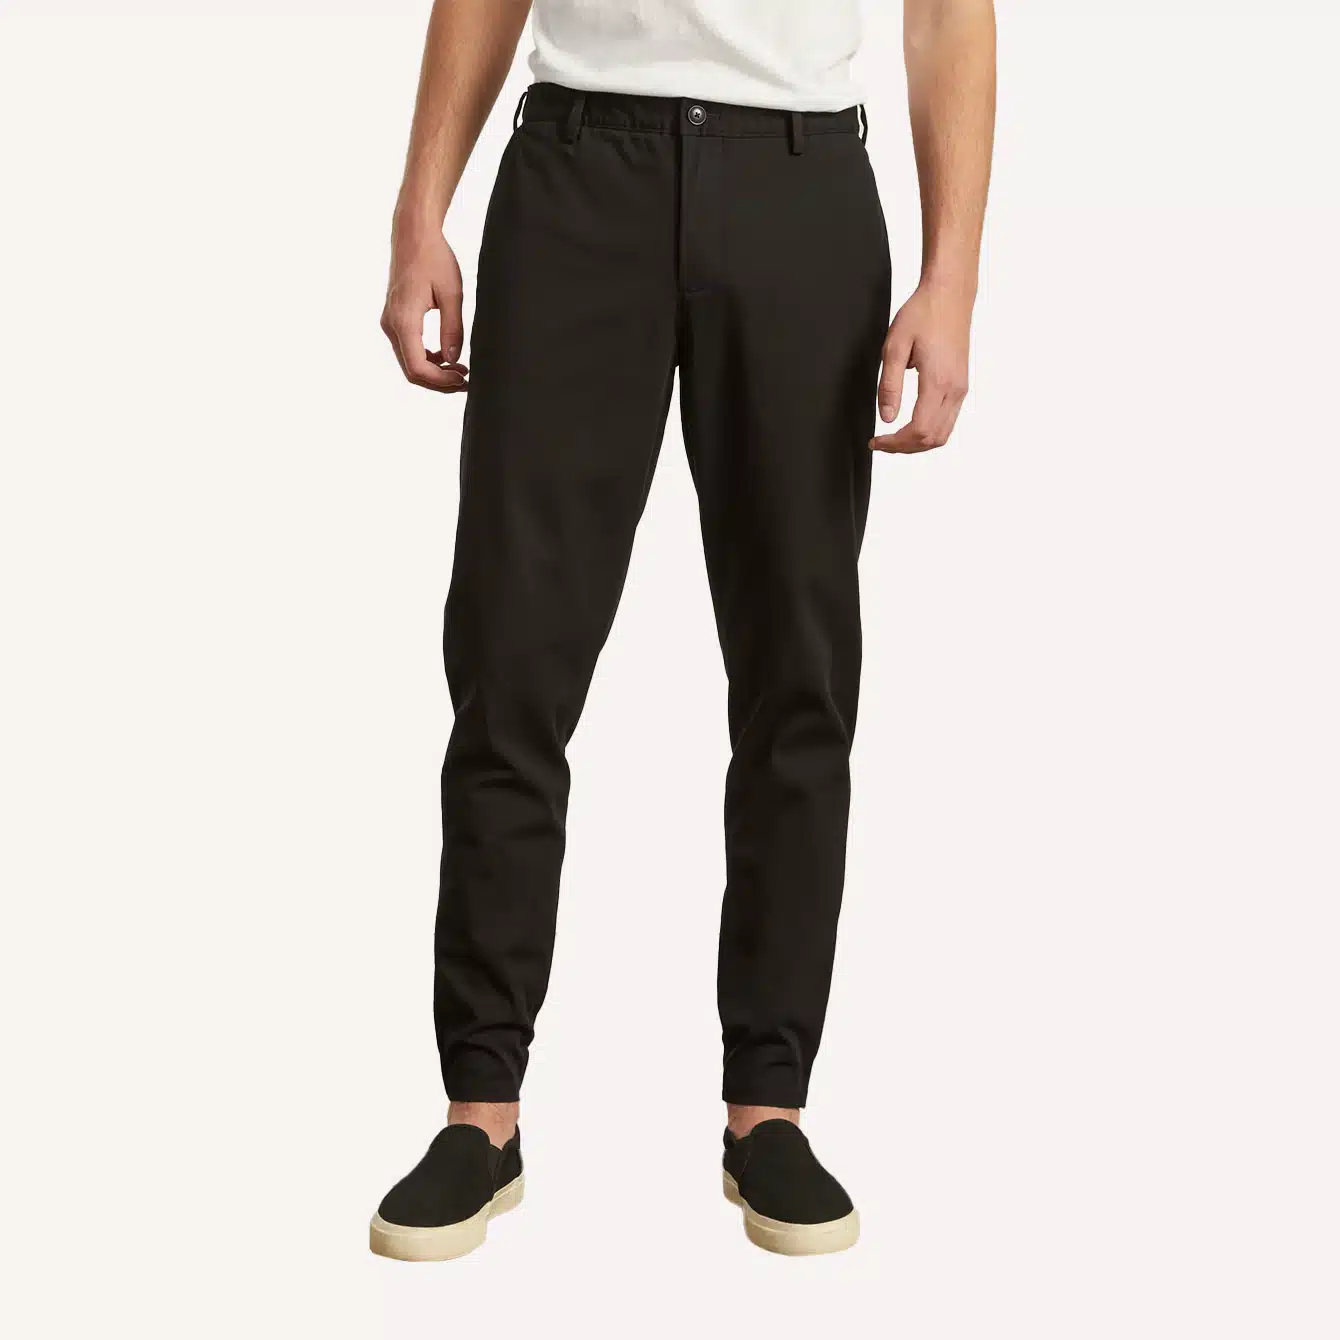 sophisticated travel pants